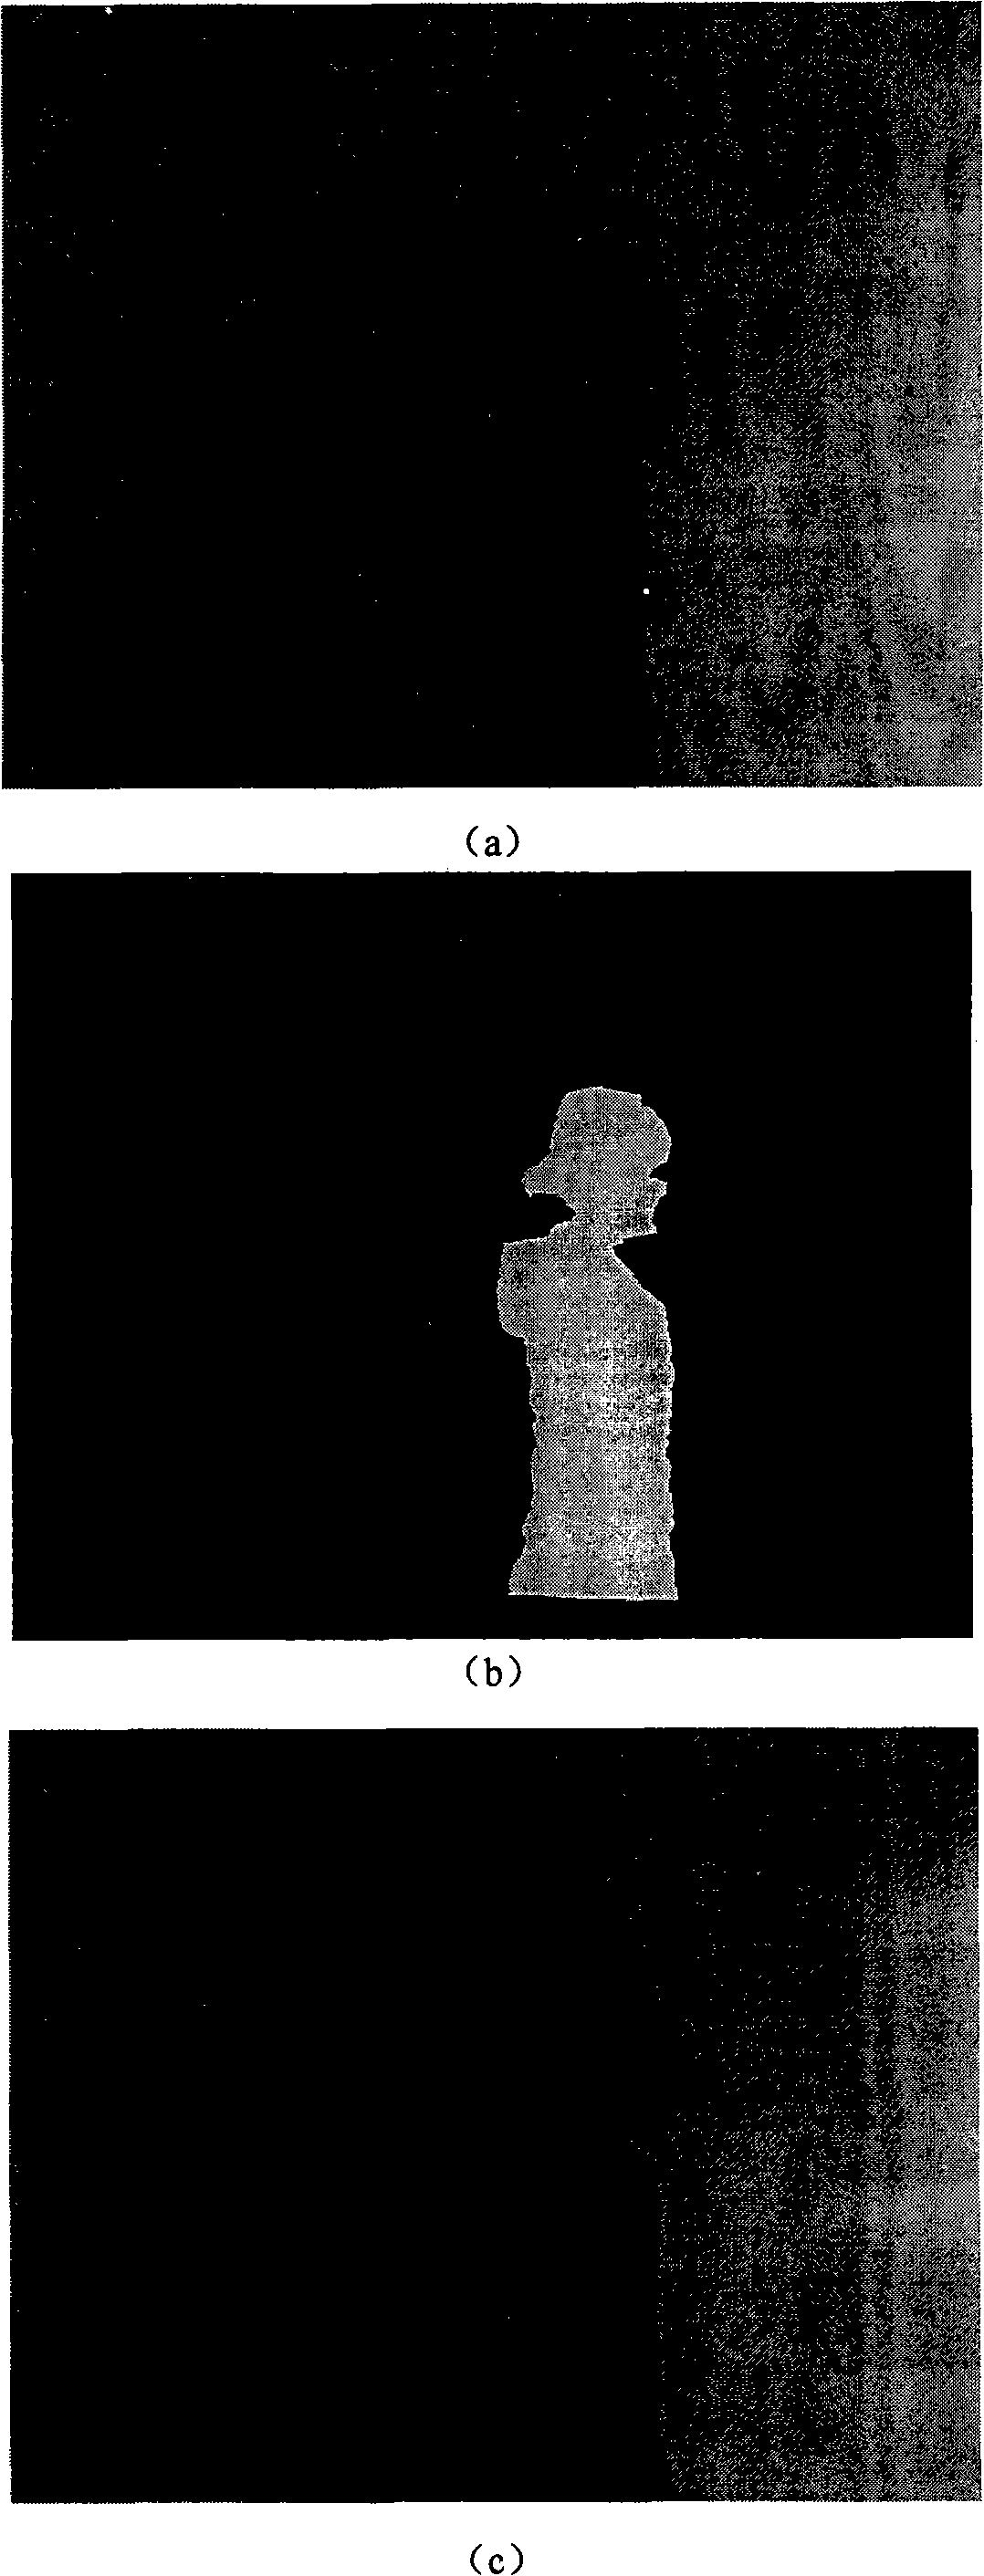 Method for converting flat video to tridimensional video based on bidirectional tracing and characteristic points correction